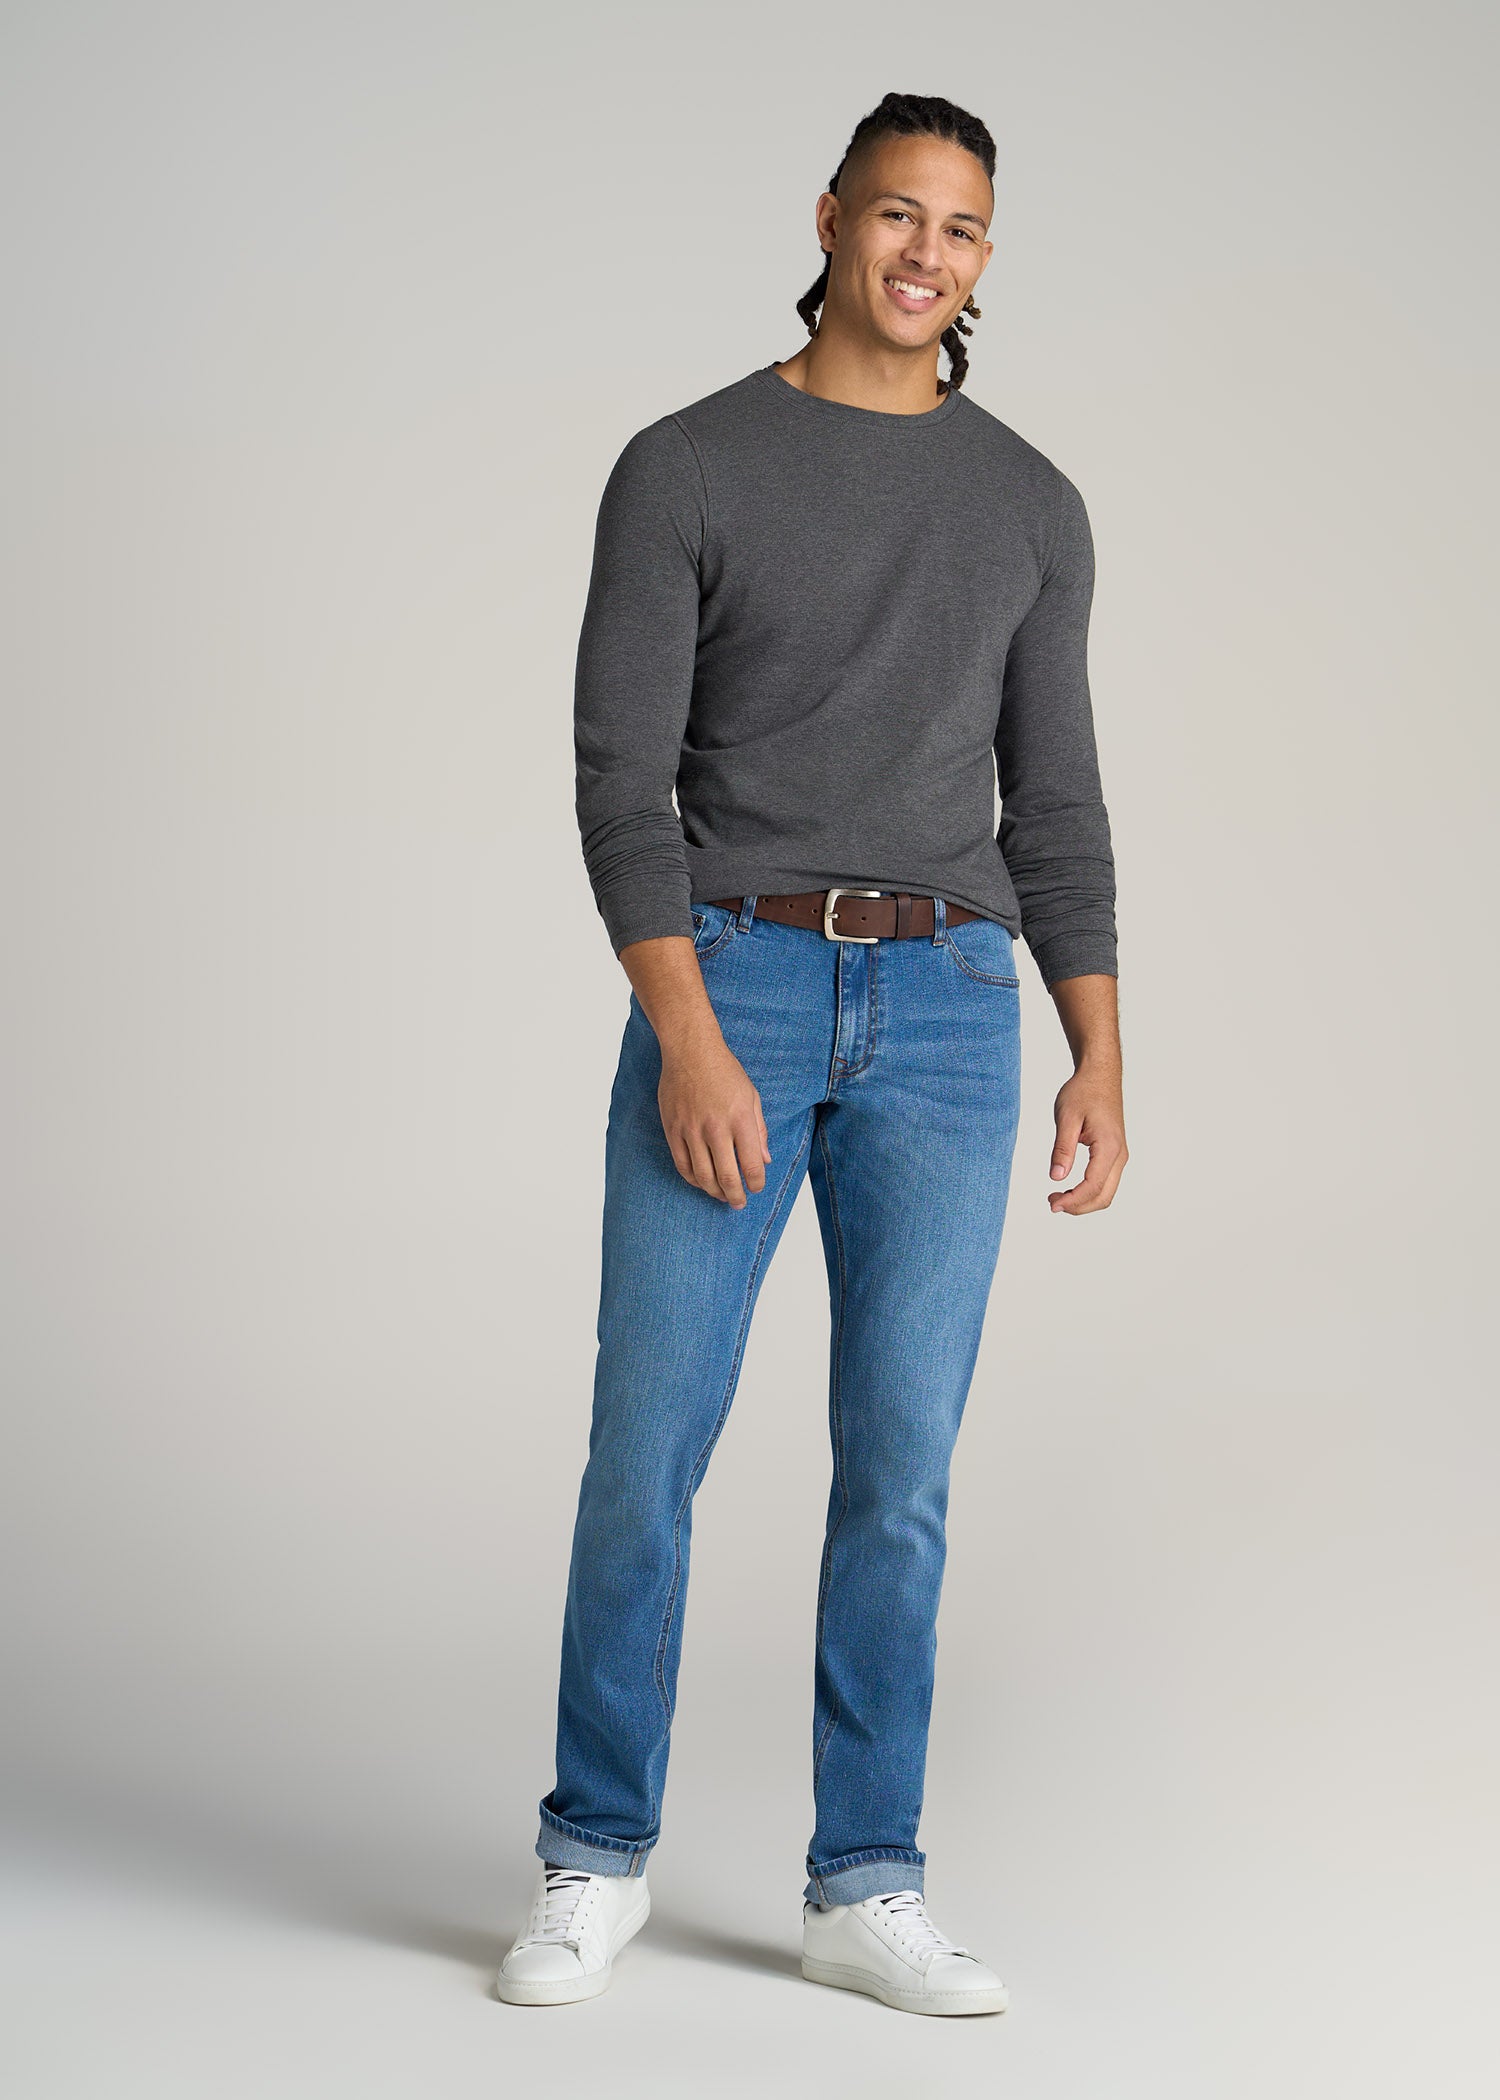 Our Fit, Long & Slim Clothing For Tall Men